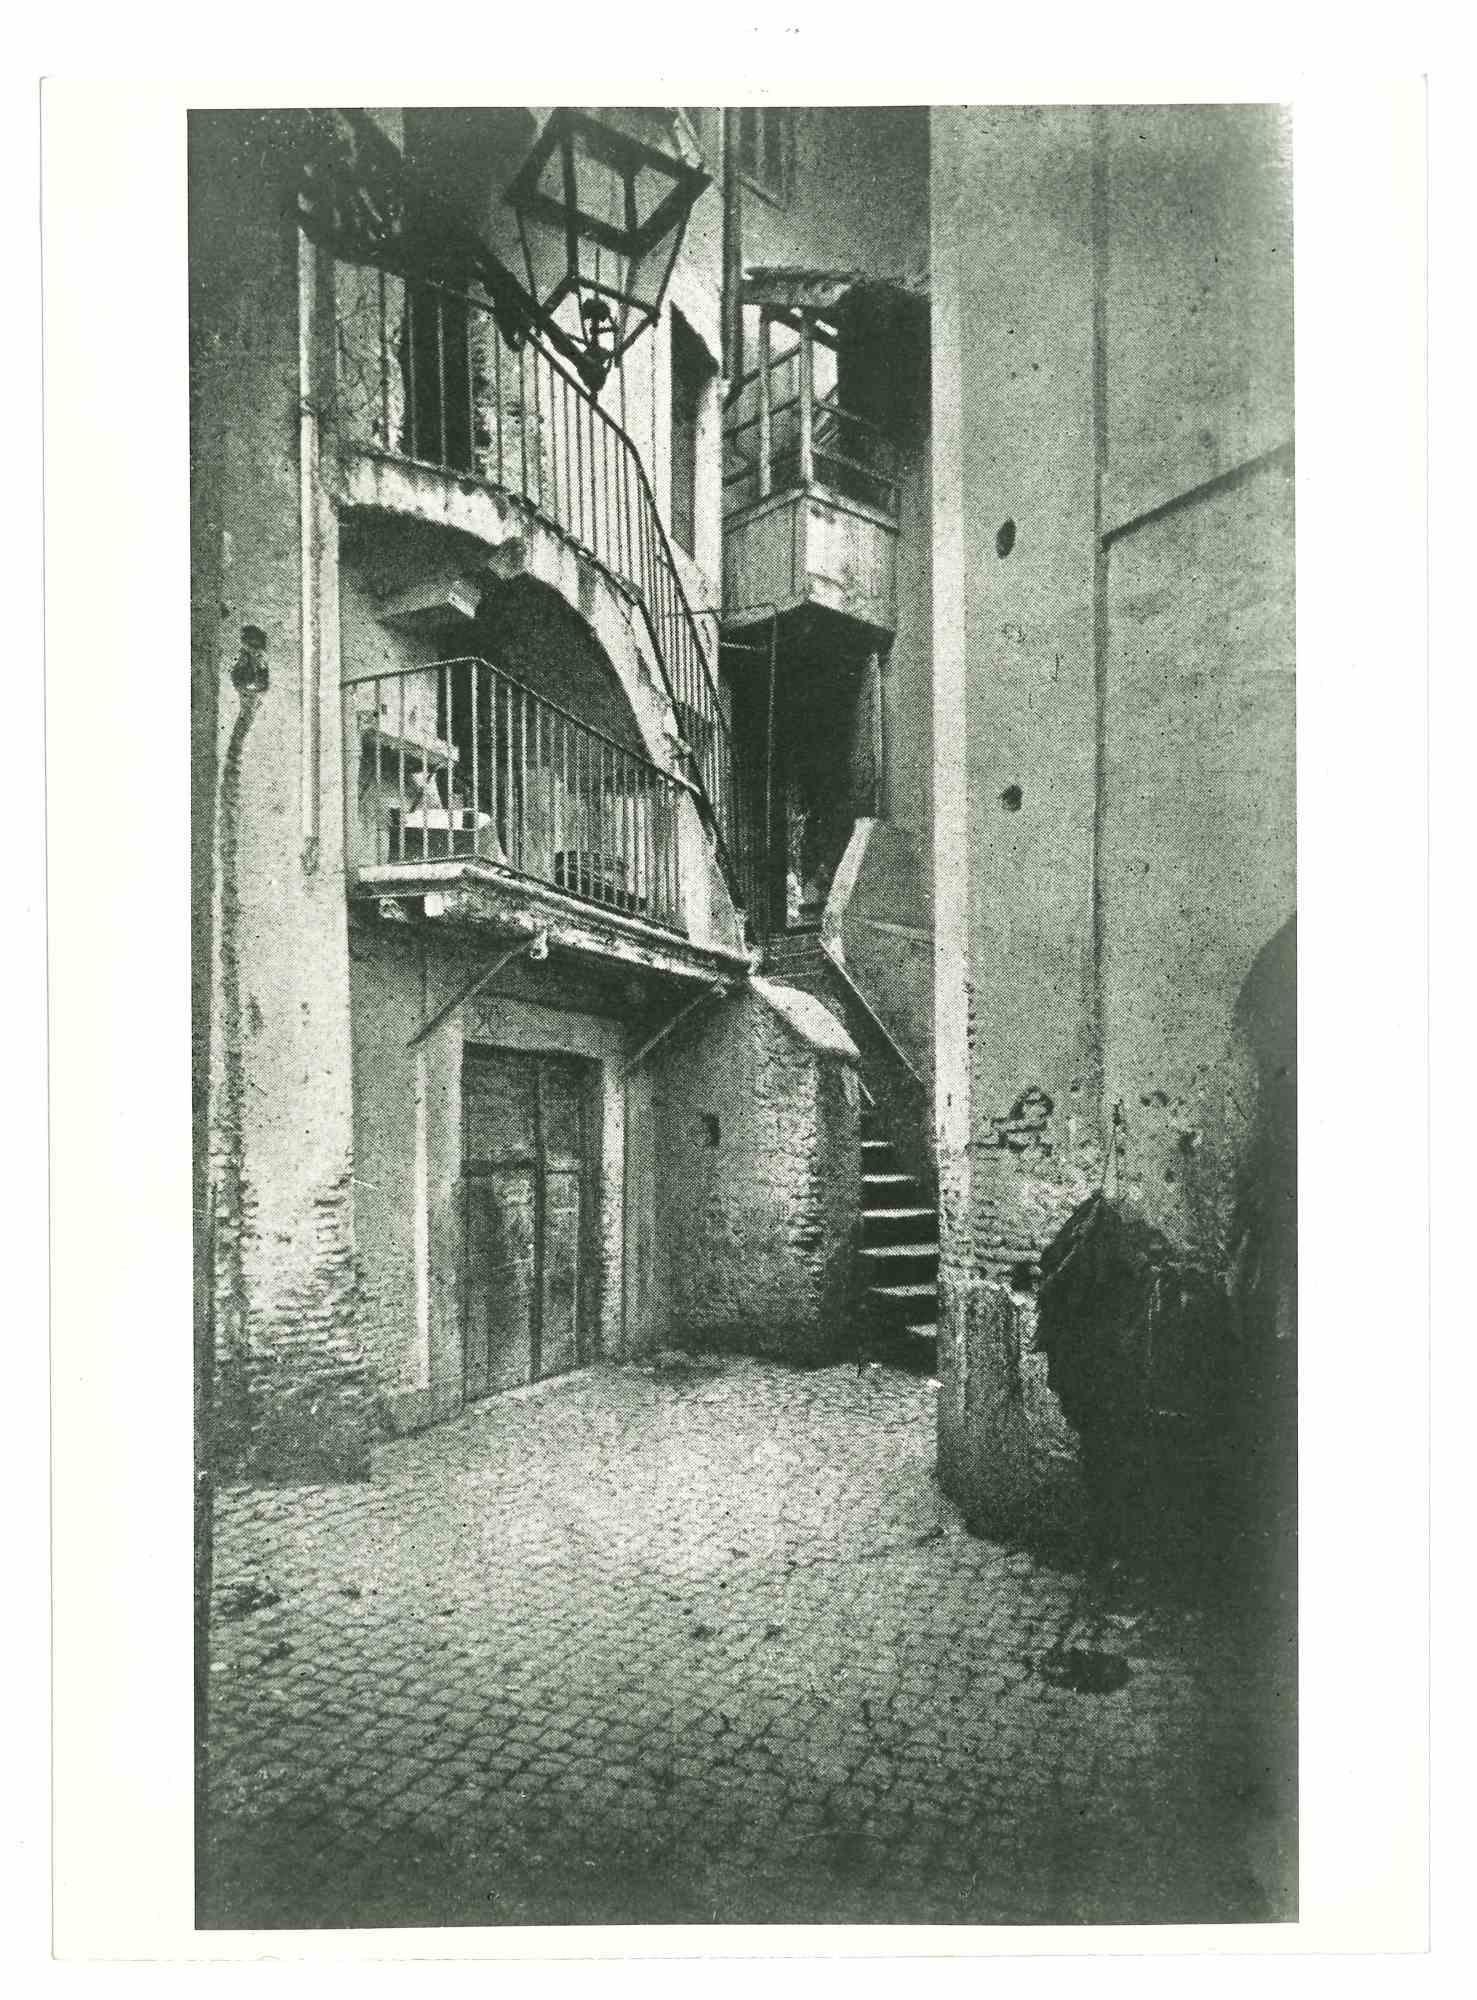 Roman House - Vintage Photograph - Early 20th Century